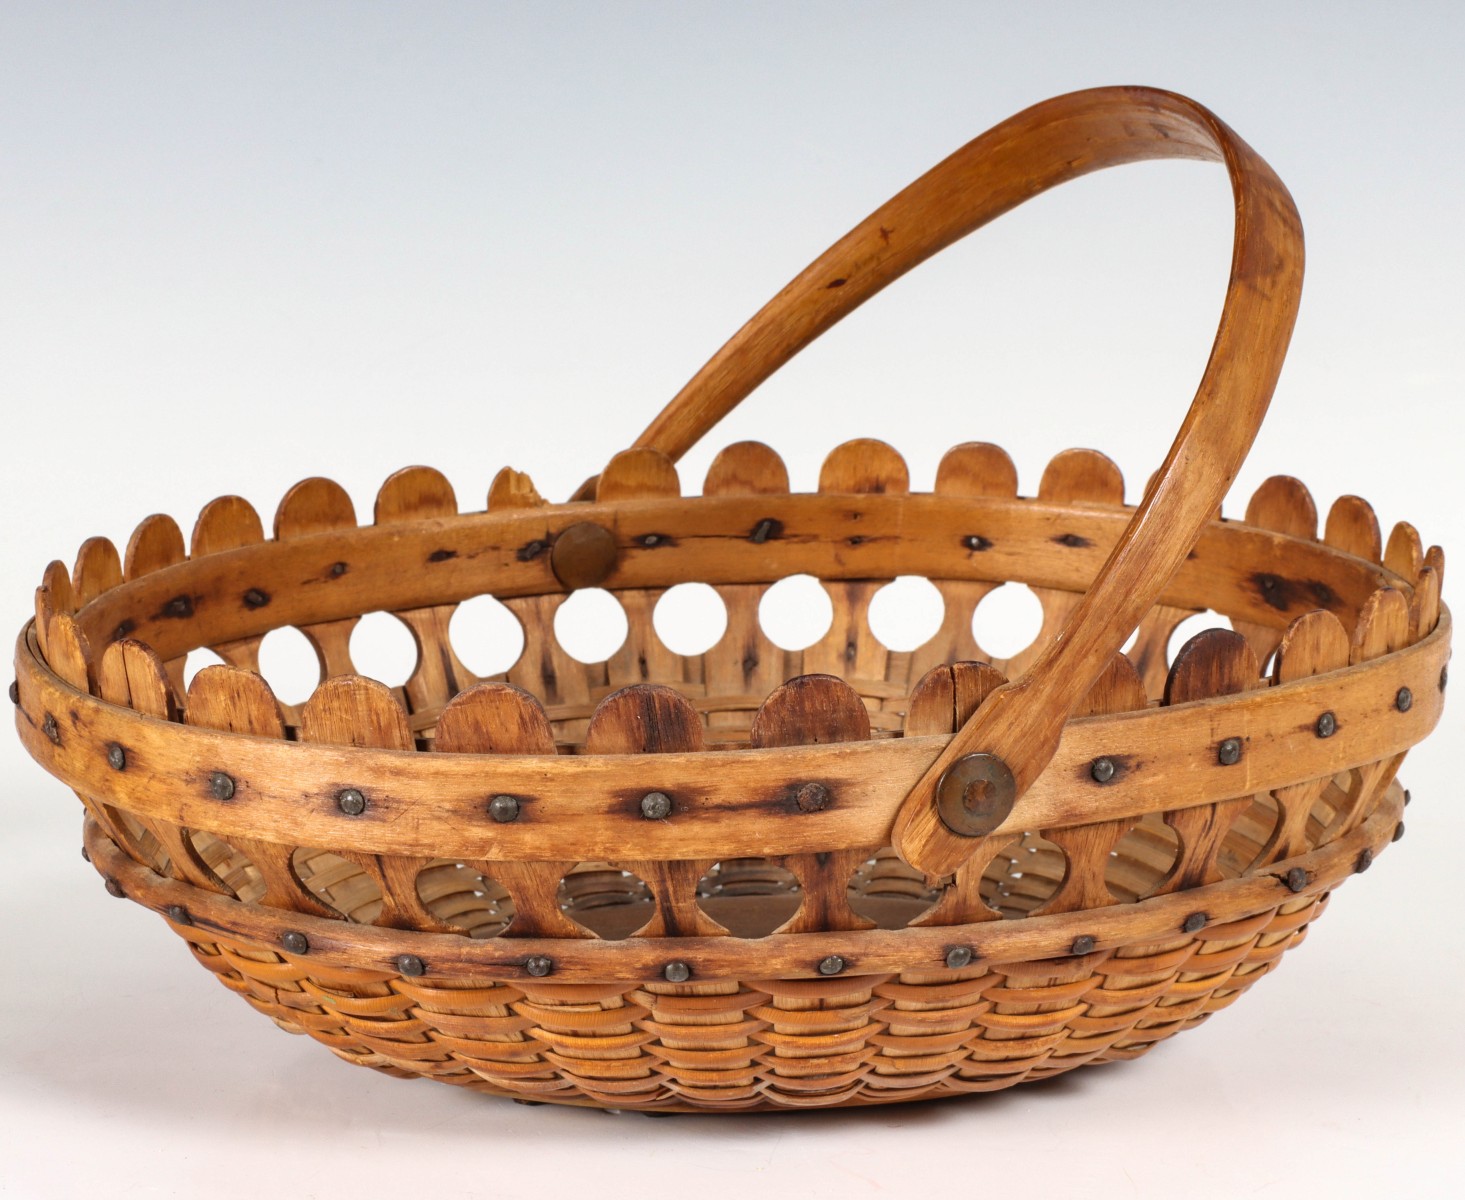 A RARE EARLY 20TH C. WOOD STAVE NANTUCKET BASKET